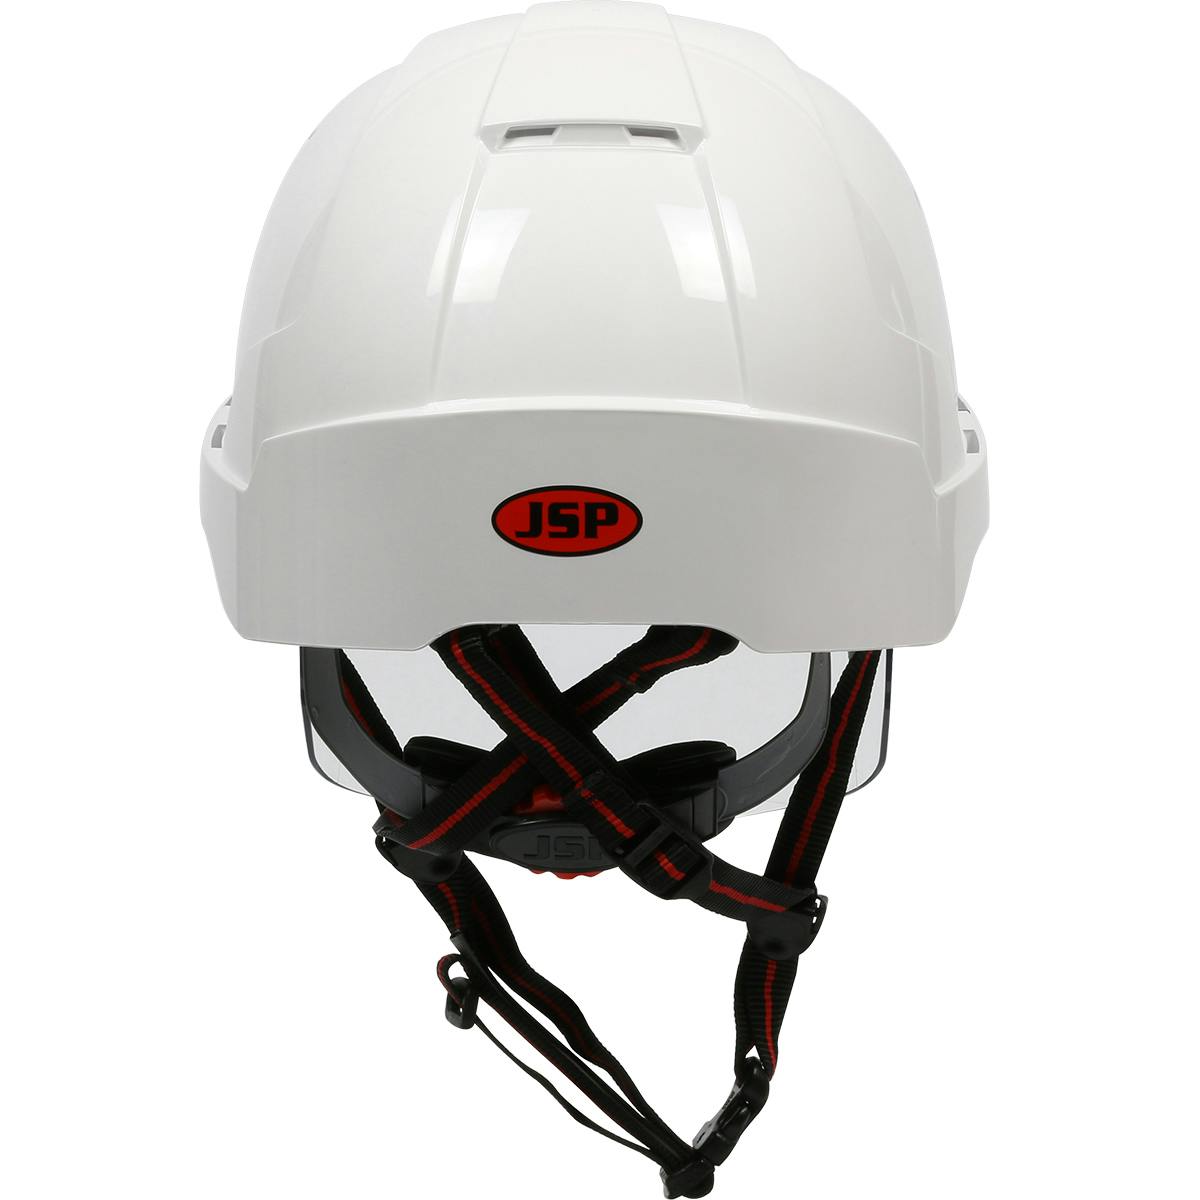 Type I, Non-vented Industrial Safety Helmet with fully adjustable four point chinstrap, Lightweight ABS Shell, Integrated Faceshield, 6-Point Polyester Suspension and Wheel Ratchet Adjustment, White-Smoke (280-EVSN-CH) - OS